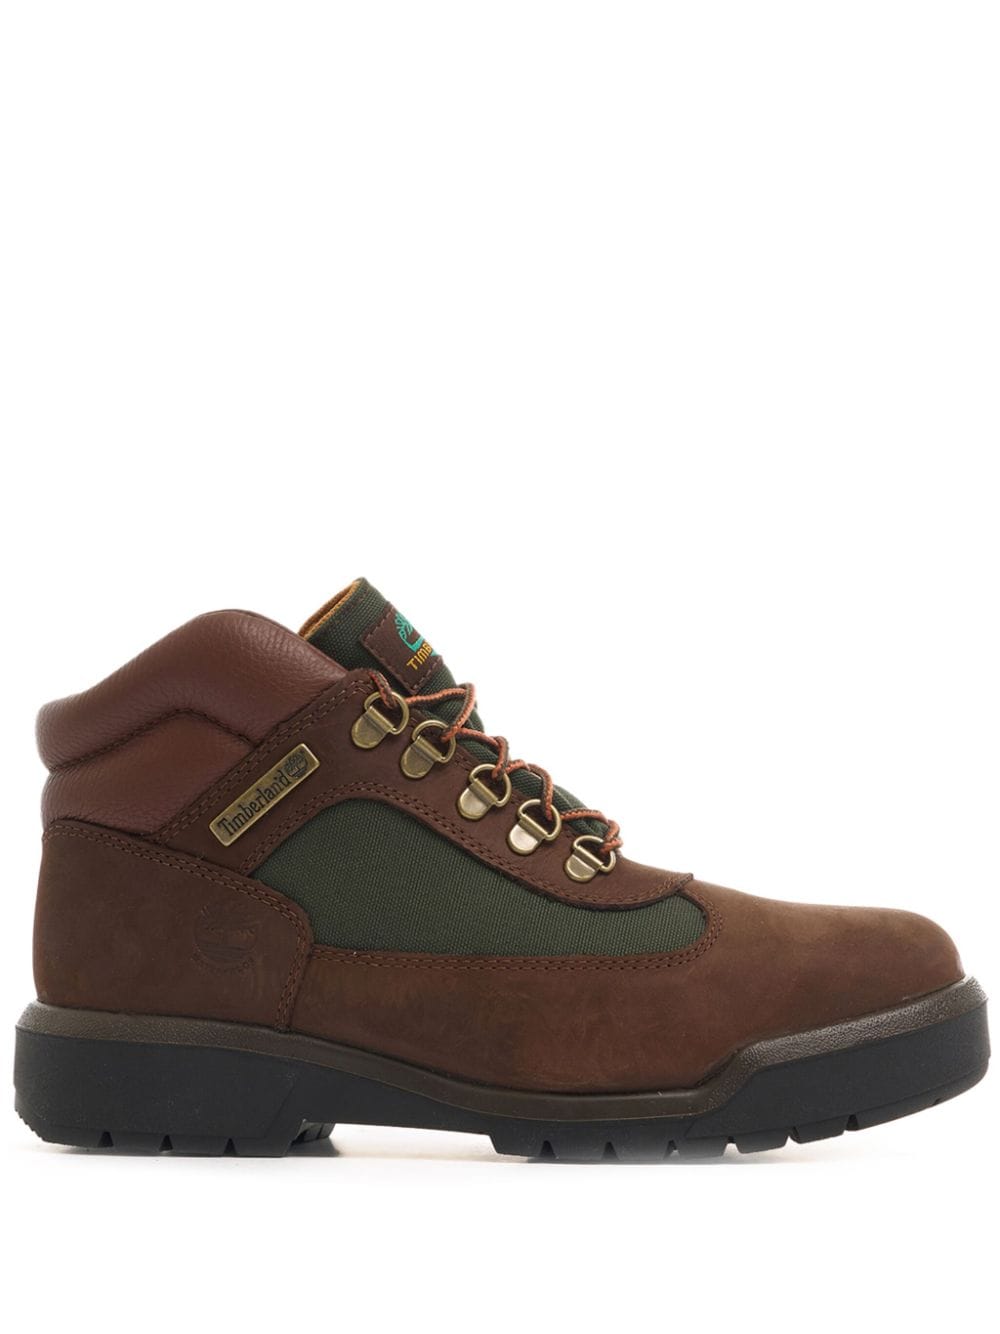 Timberland panelled leather ankle boot - Brown von Timberland